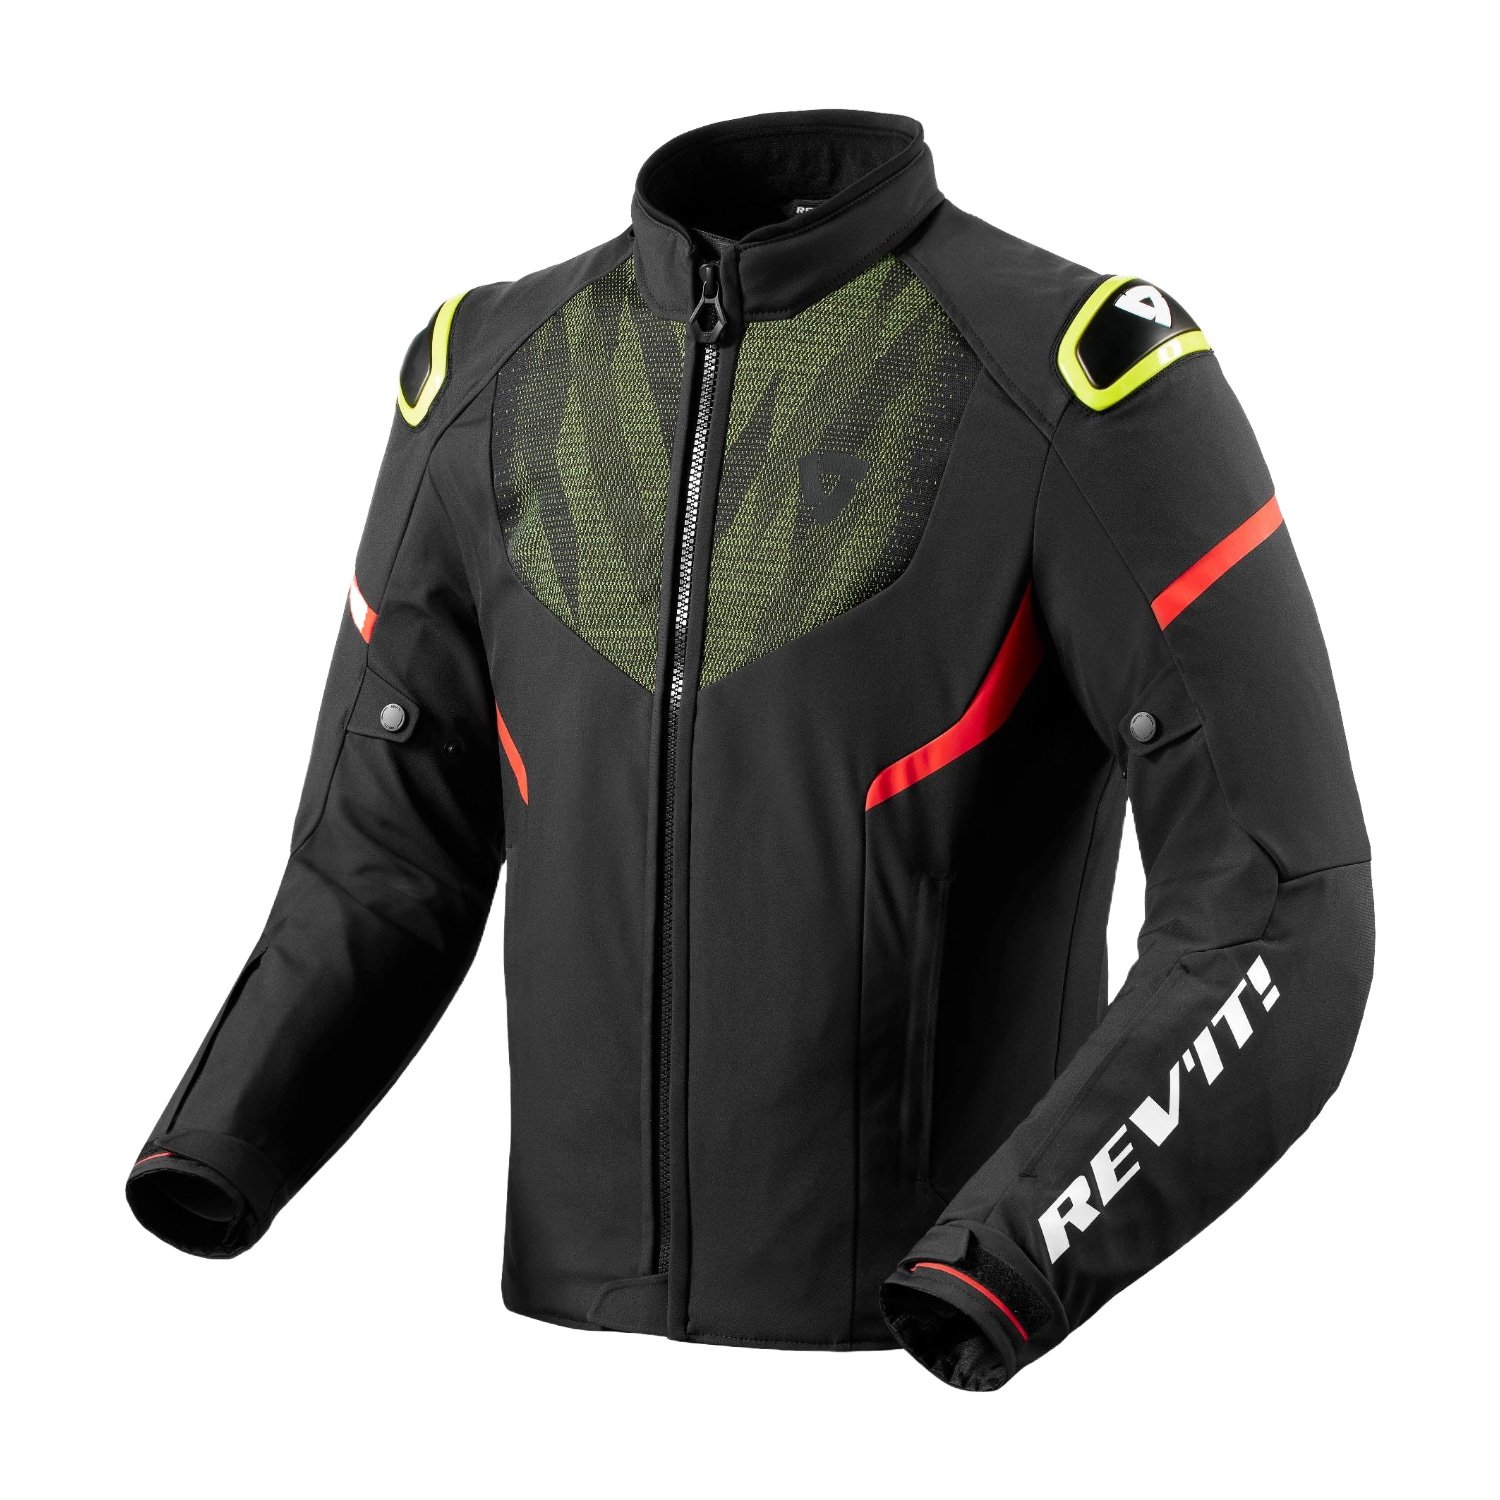 Image of REV'IT! Hyperspeed 2 H2O Jacket Black Neon Yellow Talla L